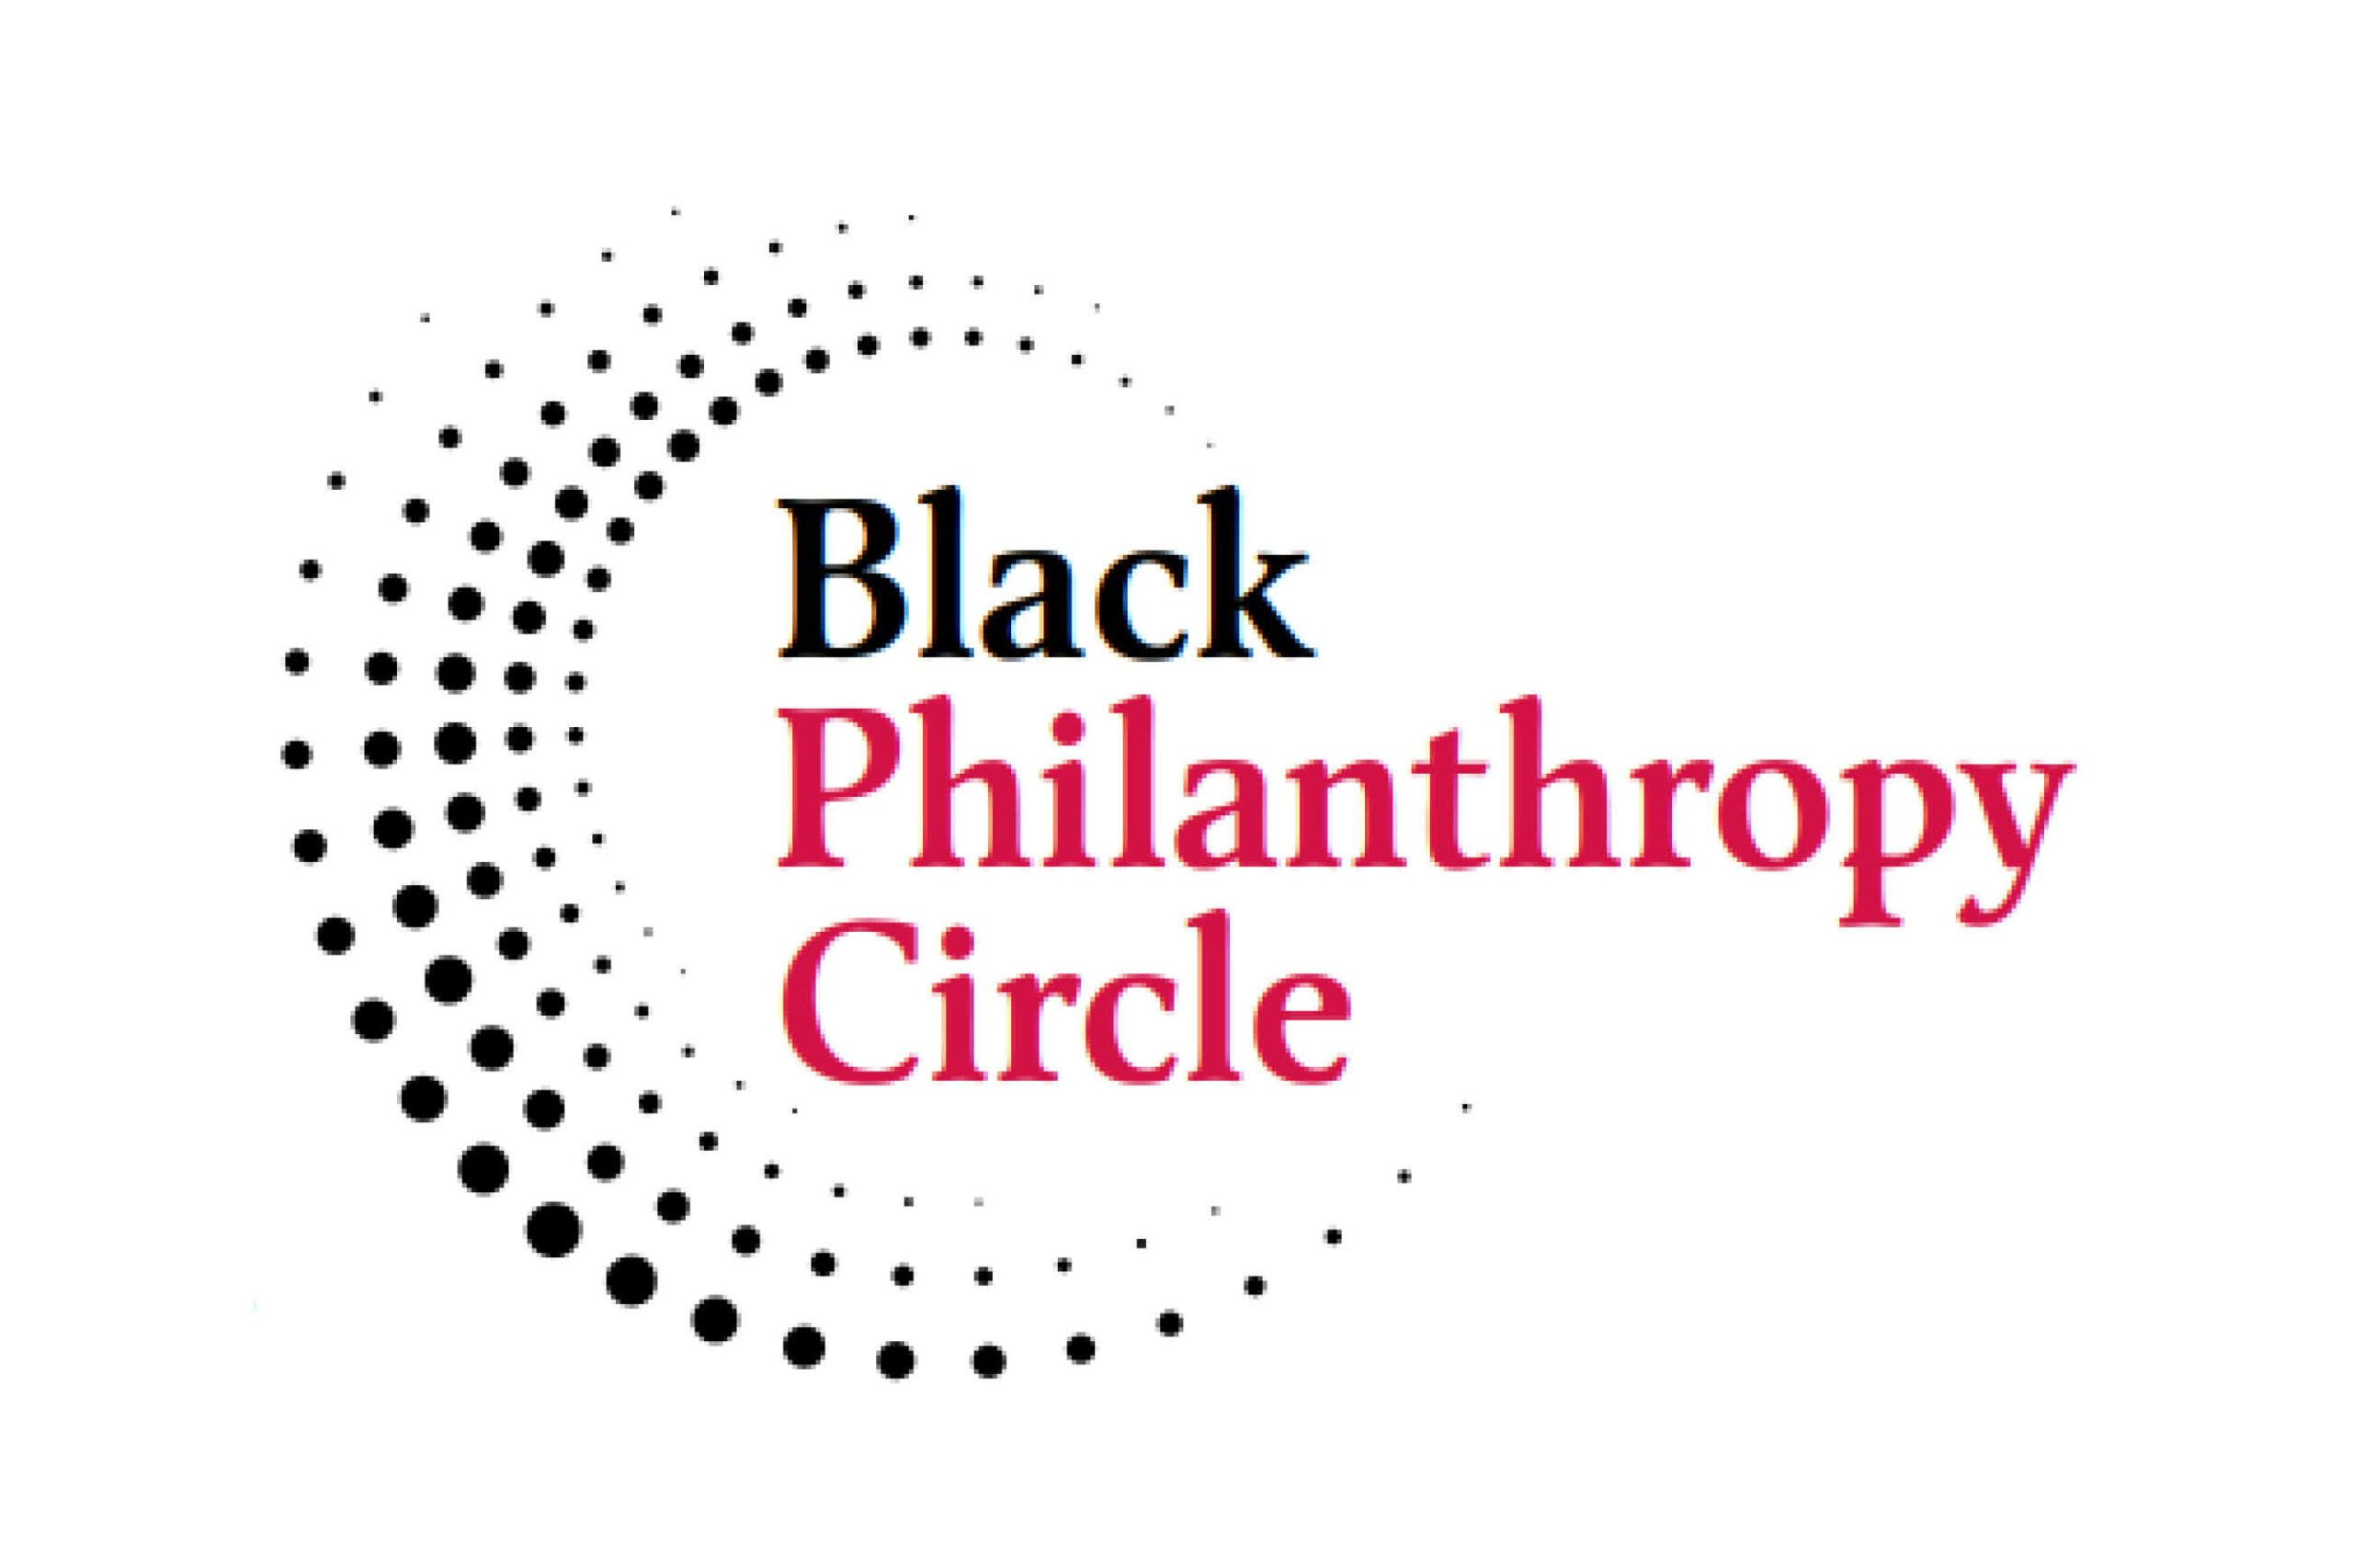 The Black Philanthropy Circle of Howard County